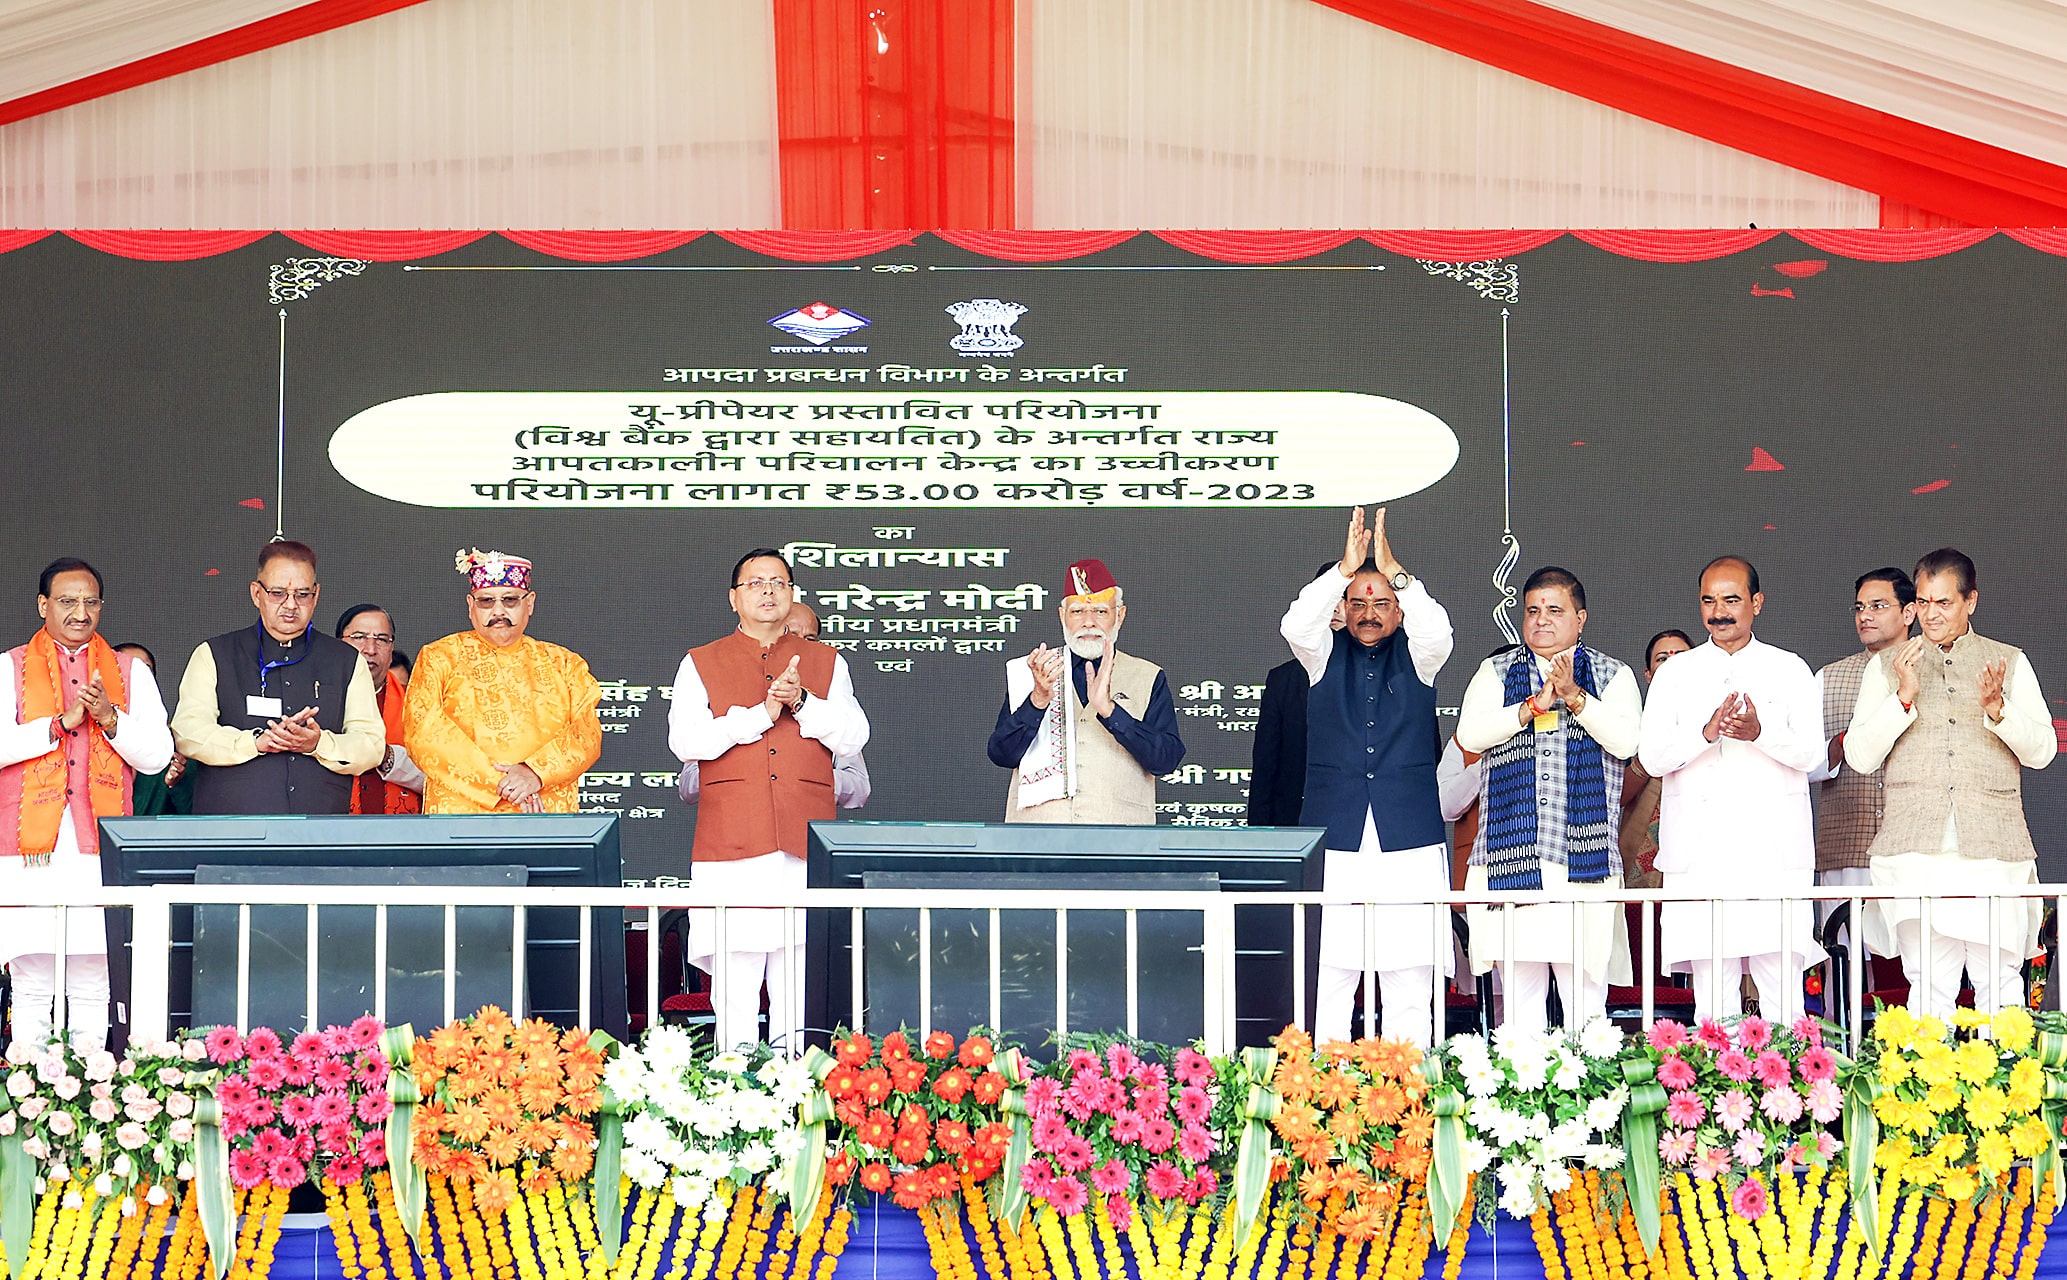 Prime Minister Narendra Modi inaugurates and lays the foundation stone of multiple development projects, in Pithoragarh on Thursday. Union Minister of State for Defence Ajay Bhatt, Uttarakhand Chief Minister Pushkar Singh Dhami, Mahendra Bhatt and others are also present.